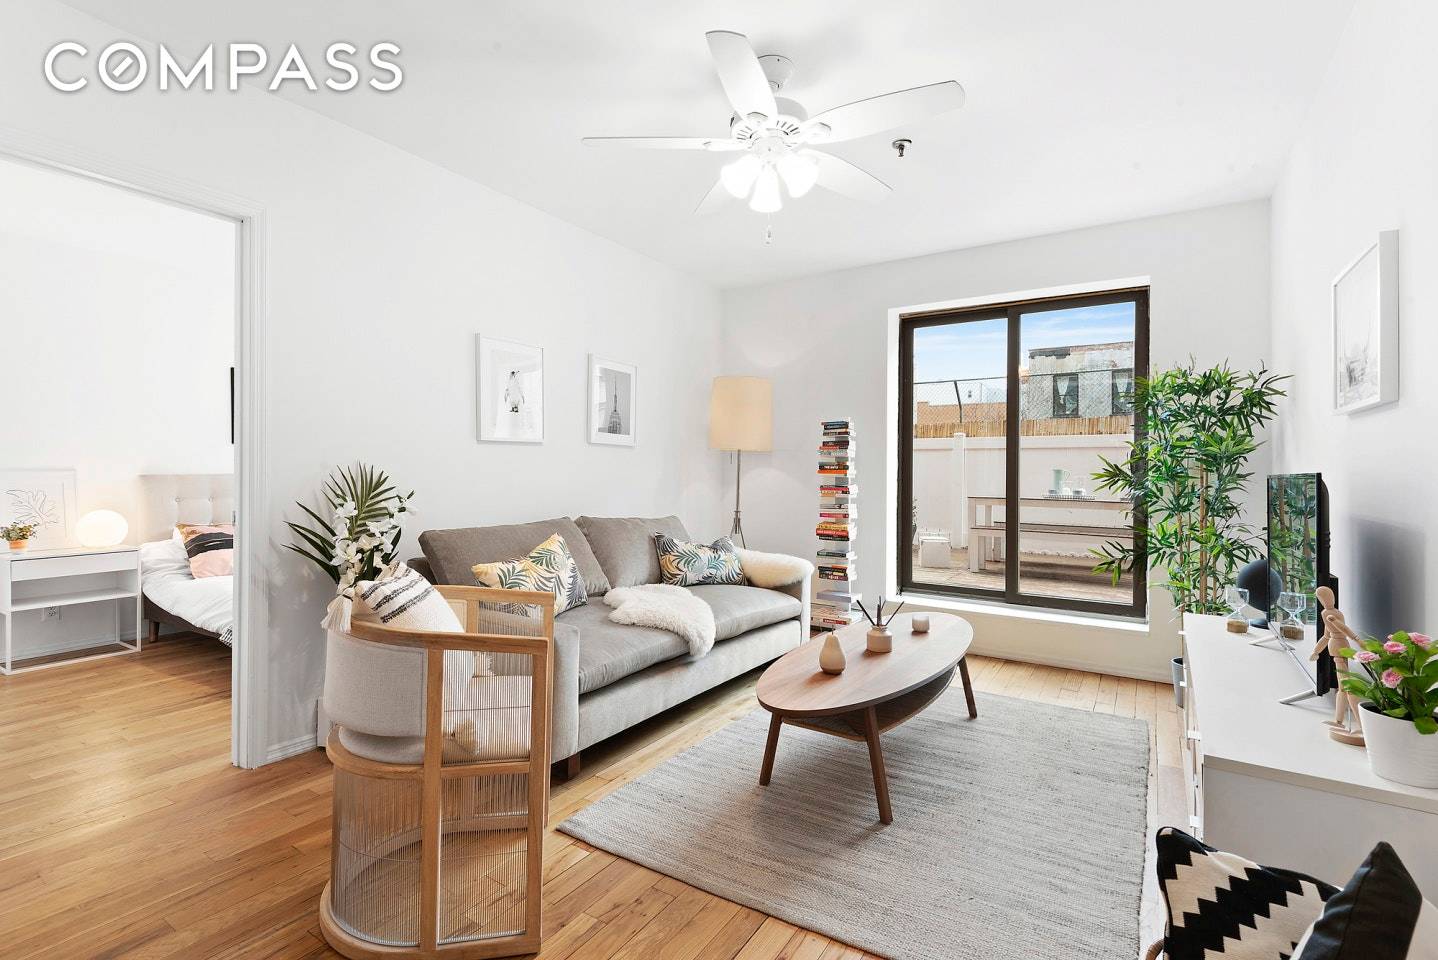 New to the market, Upcoming renovated 2 bedroom Prime Cobble Hill apartment situated between Smith and Court Street, right off the Bergen F amp ; G train stops.